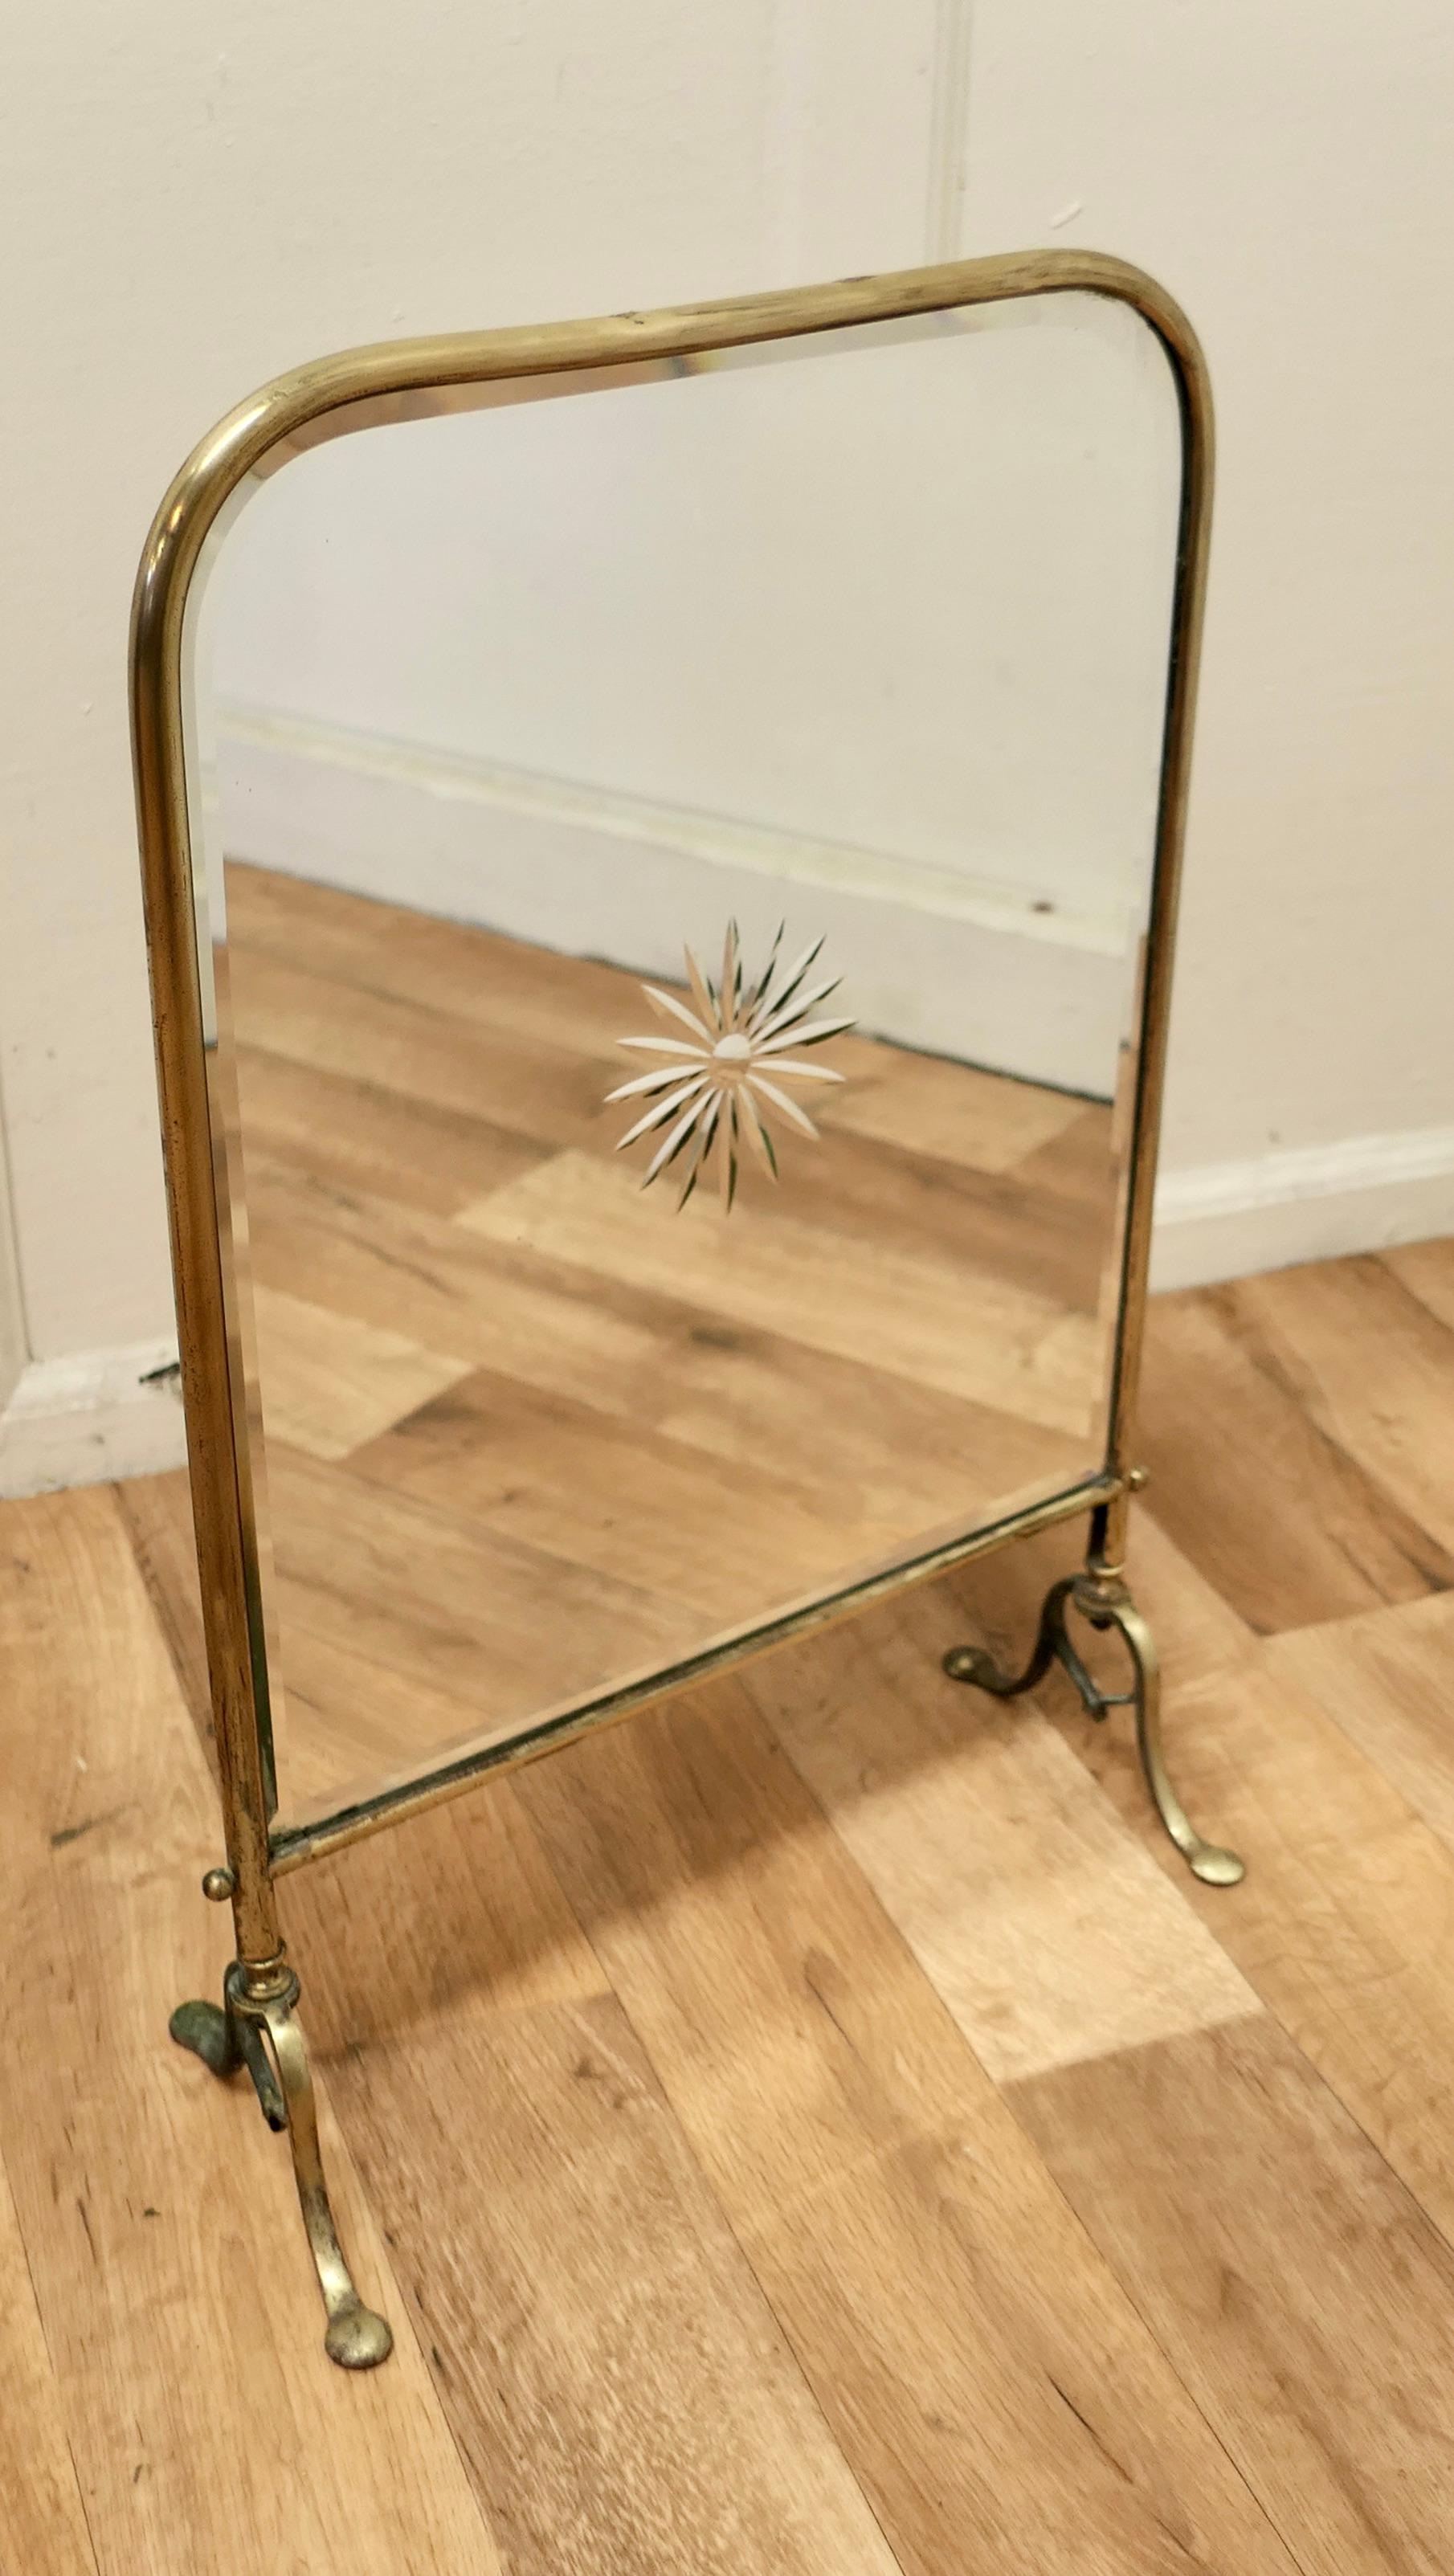 A Victorian Art Nouveau Brass and Sunburst mirror Fire Screen

This is a decorative Fire Screen it has a brass frame and stand, the bevelled Mirror has an etched Starburst in the centre
The screen is in fair used condition, there is some hazy